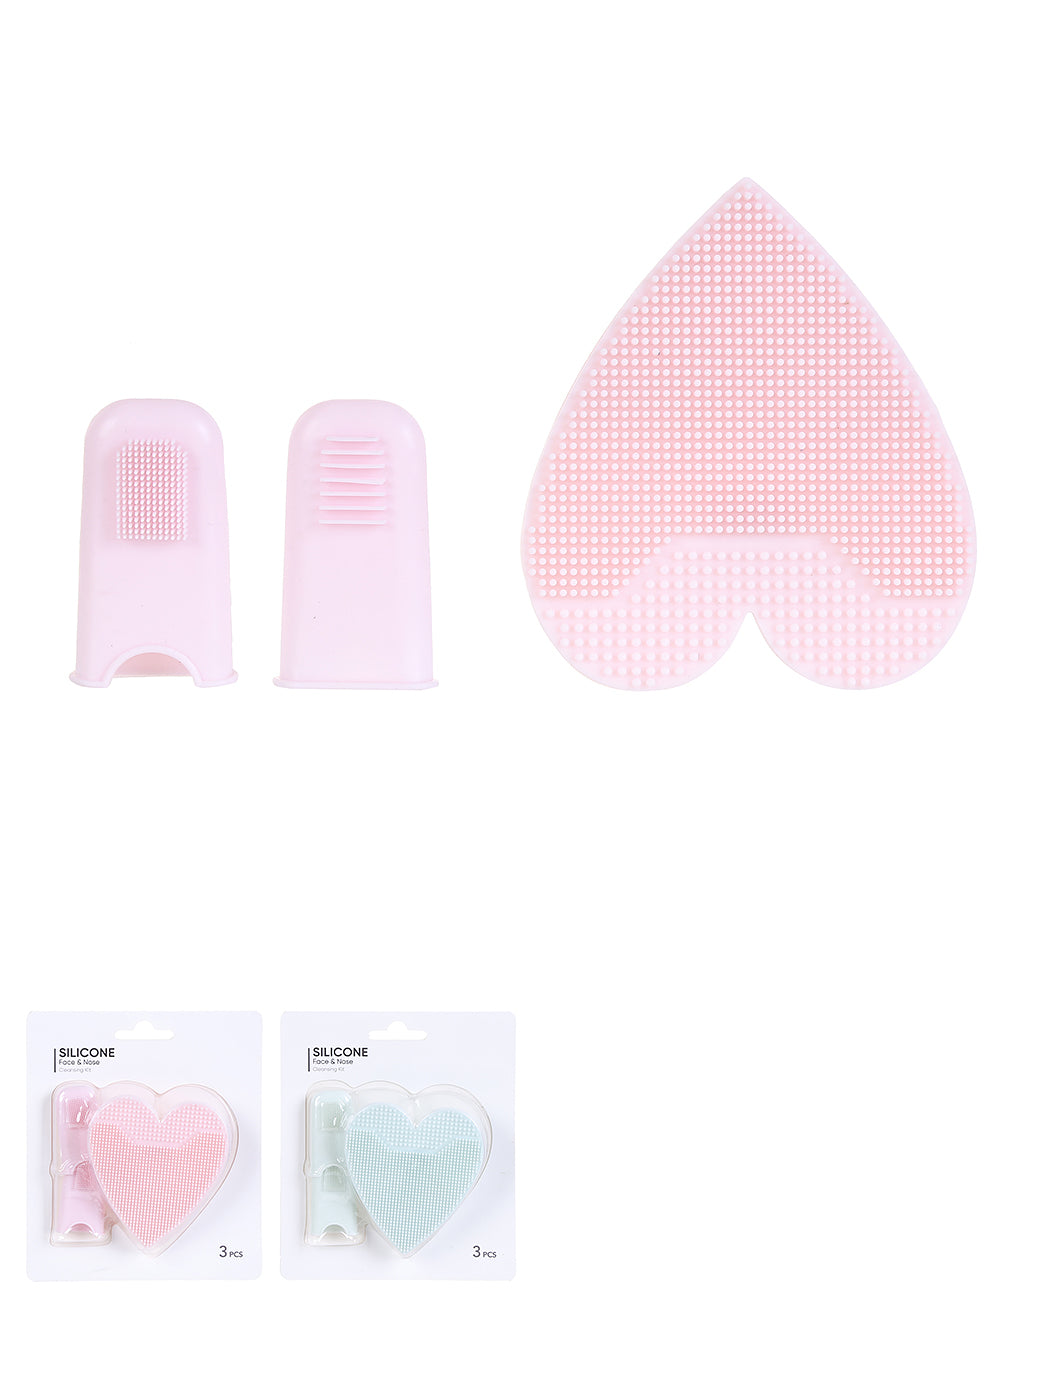 MINISO SILICONE FACE & NOSE CLEANSING KIT 2000003910106 FACIAL CLEANSING BRUSH